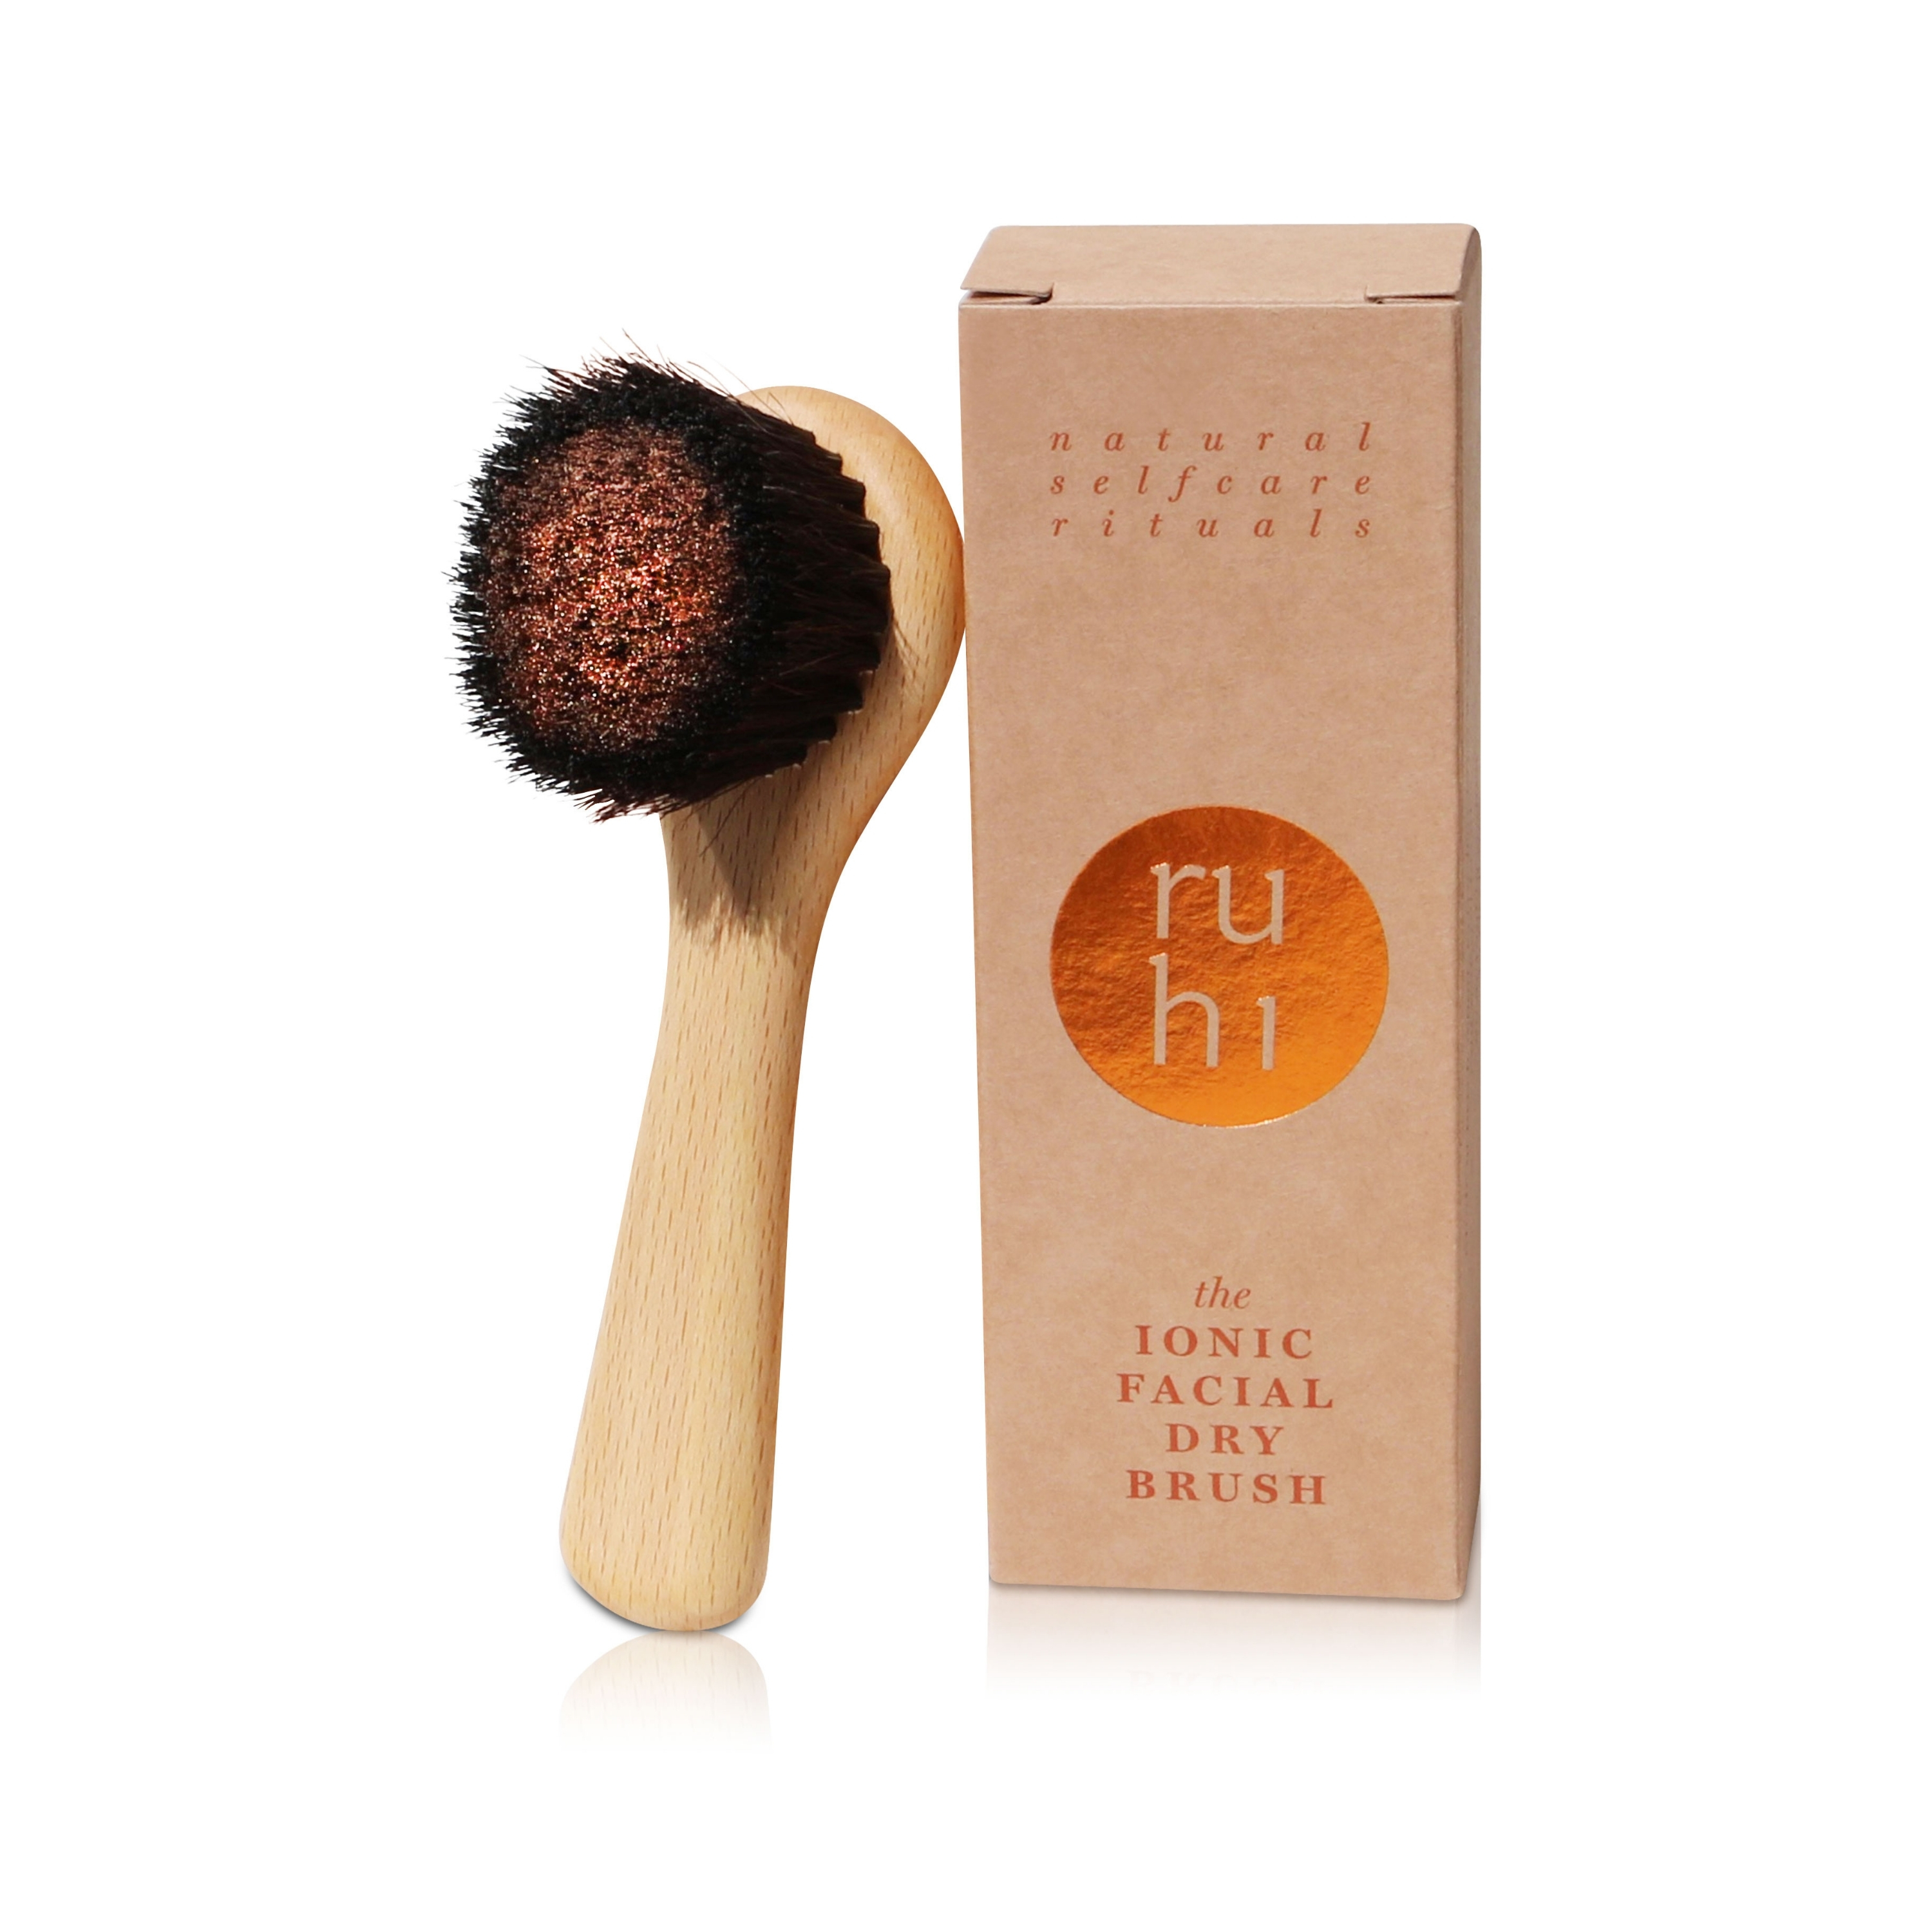 THE IONIC FACIAL DRY BRUSH